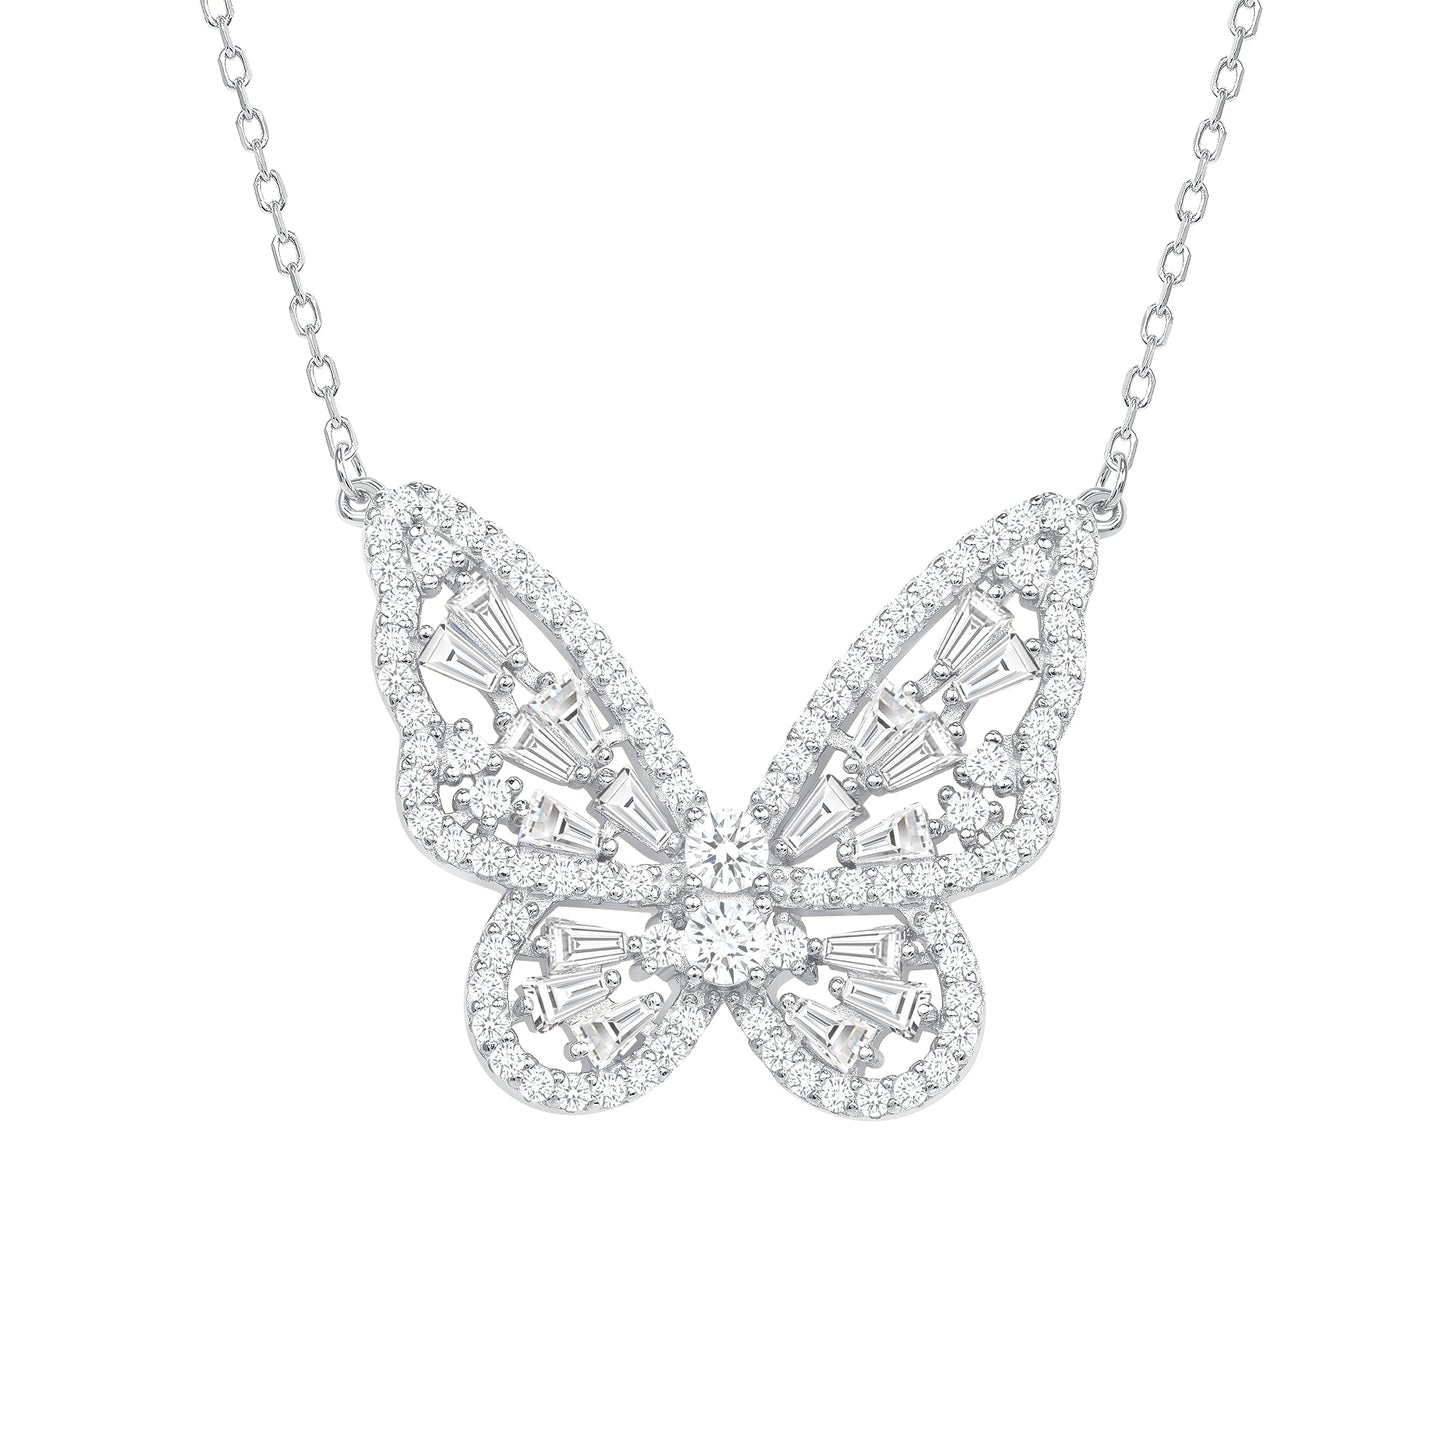 DGN1308RHD. Silver 925 Rhodium Plated Baguette Cubic Zirconia Butterfly Necklace